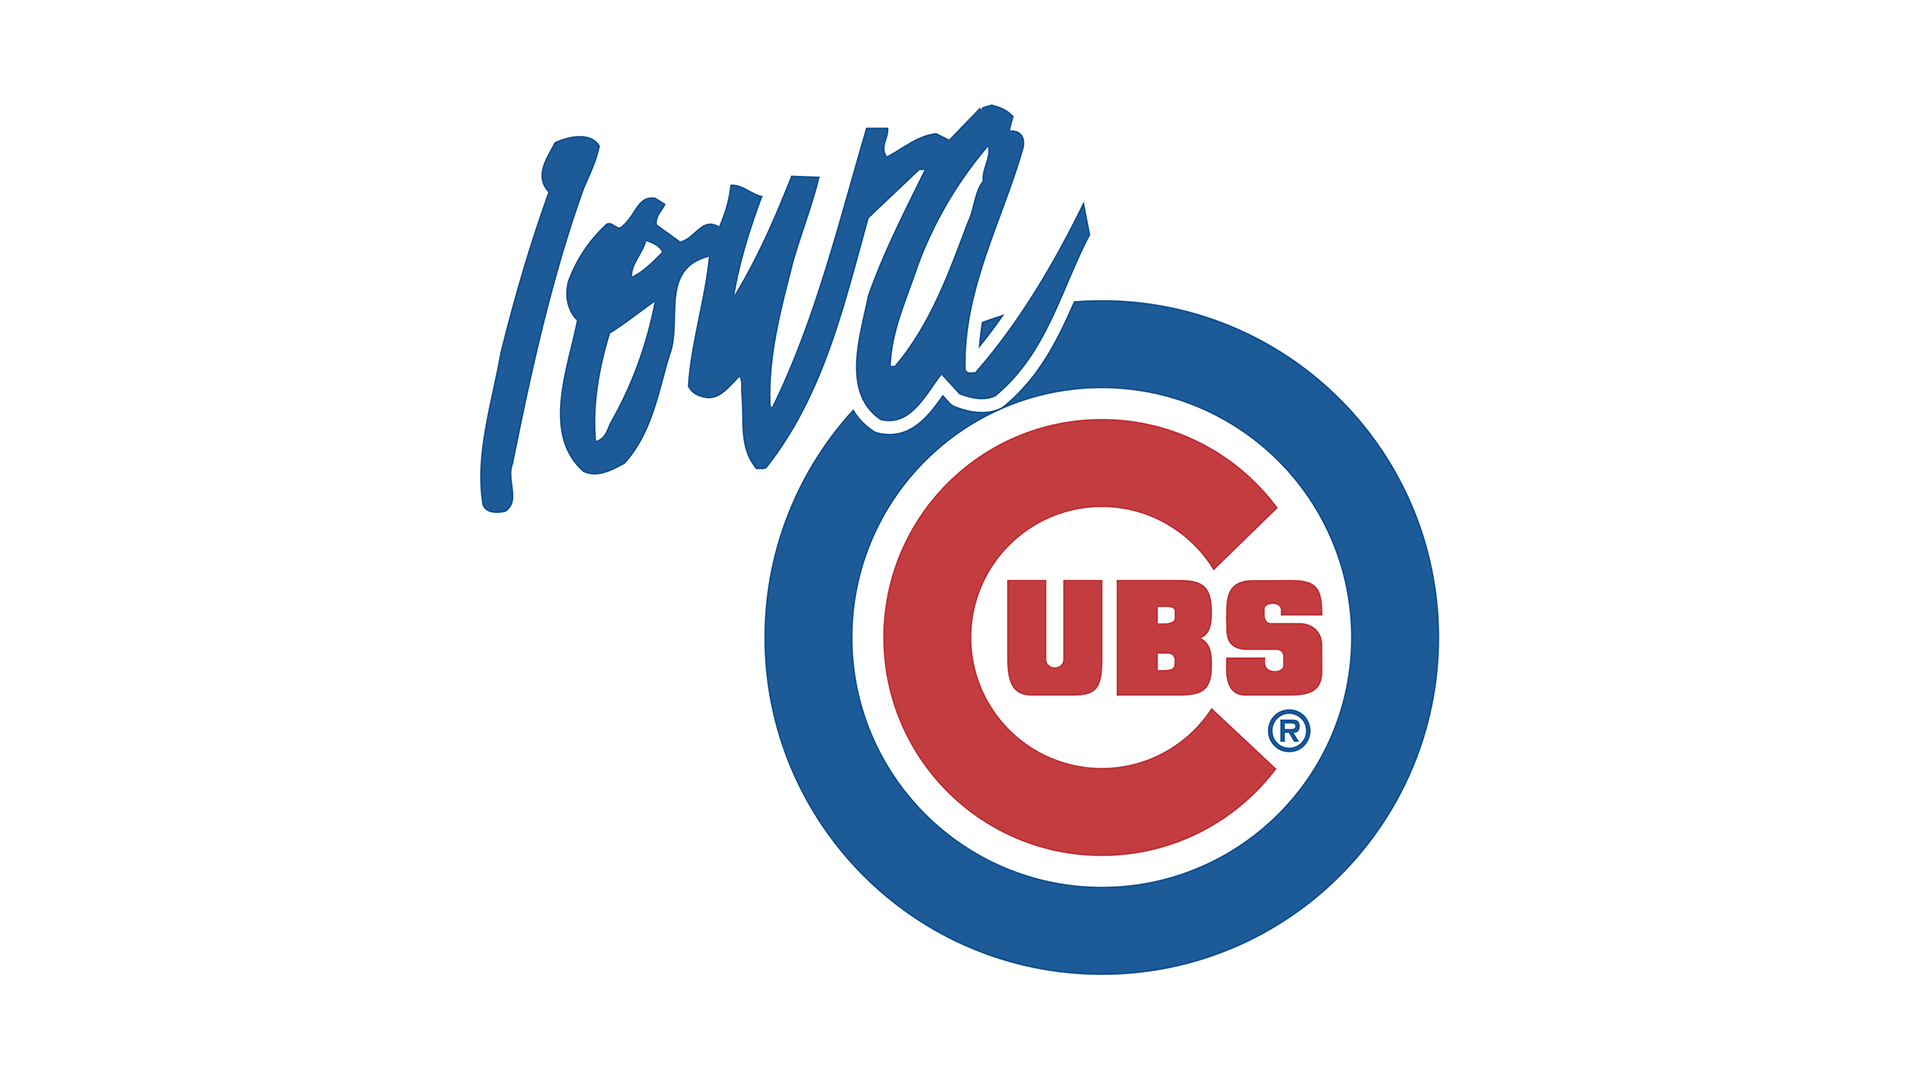 Iowa Cubs Logo - Iowa Cubs logo, Iowa Cubs Symbol, Meaning, History and Evolution